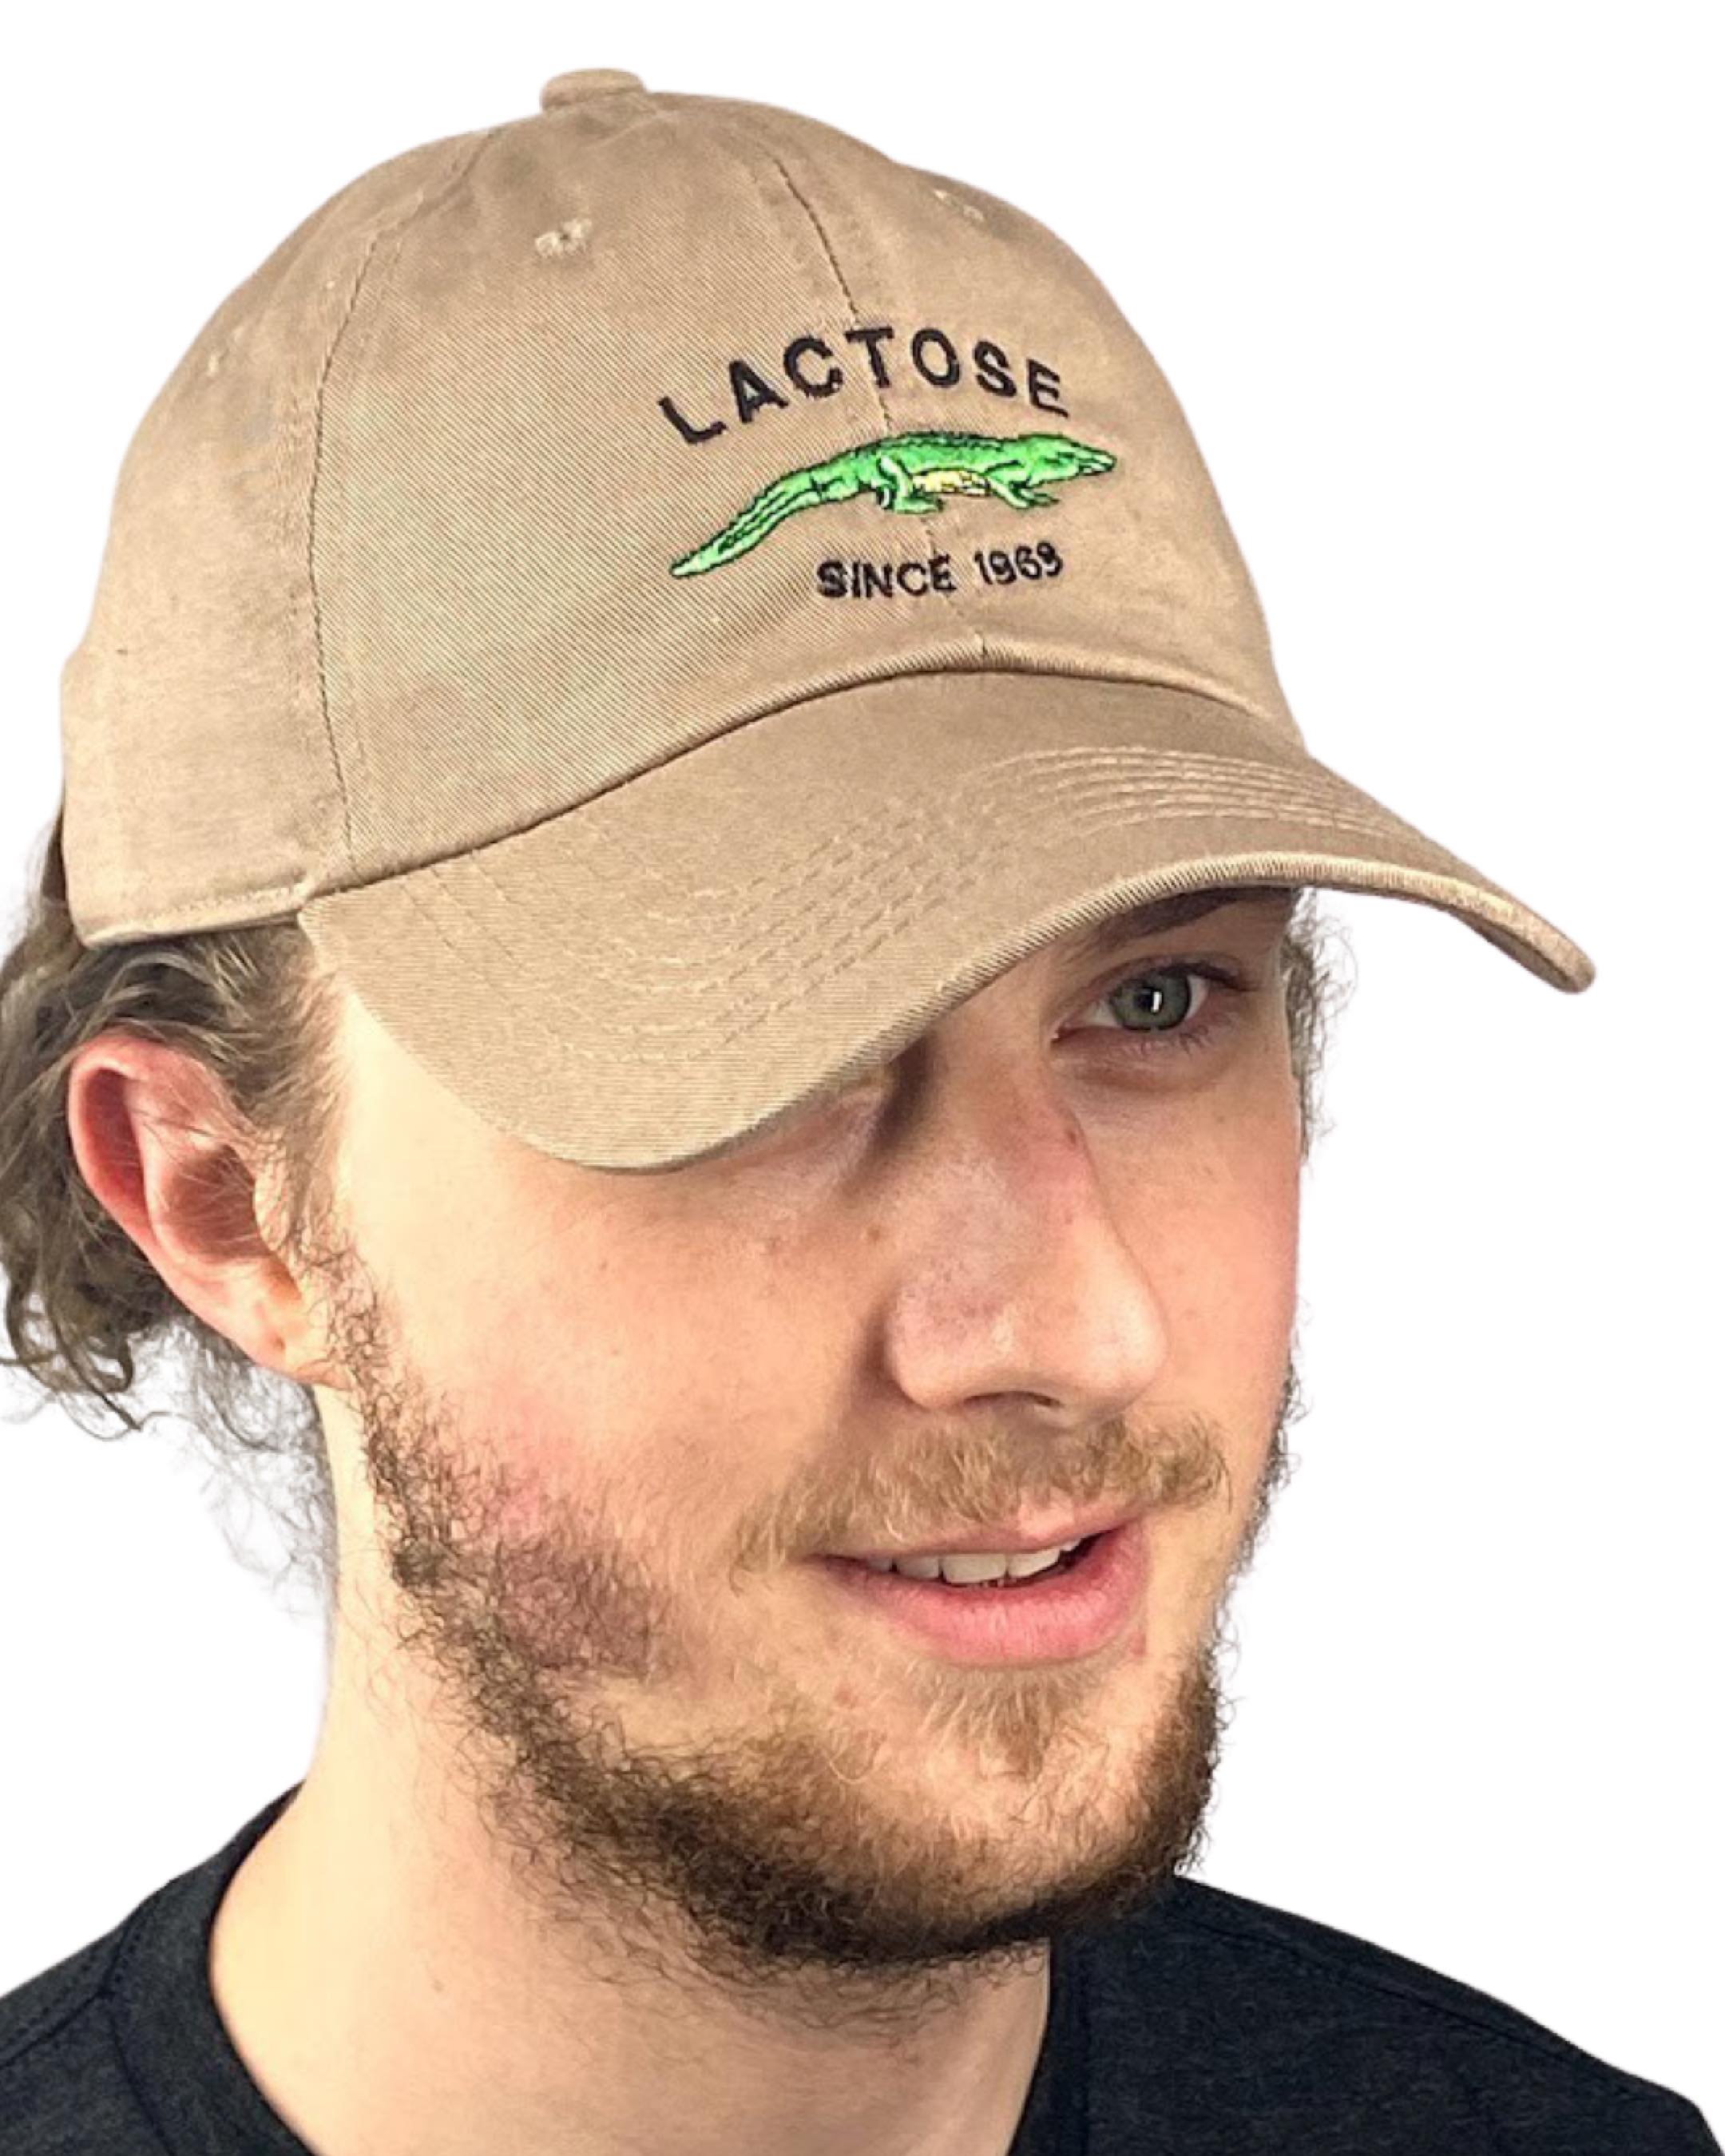 Lactose Name Brand Alligator Embroidered Tan Dad Hat, One Size Fits All